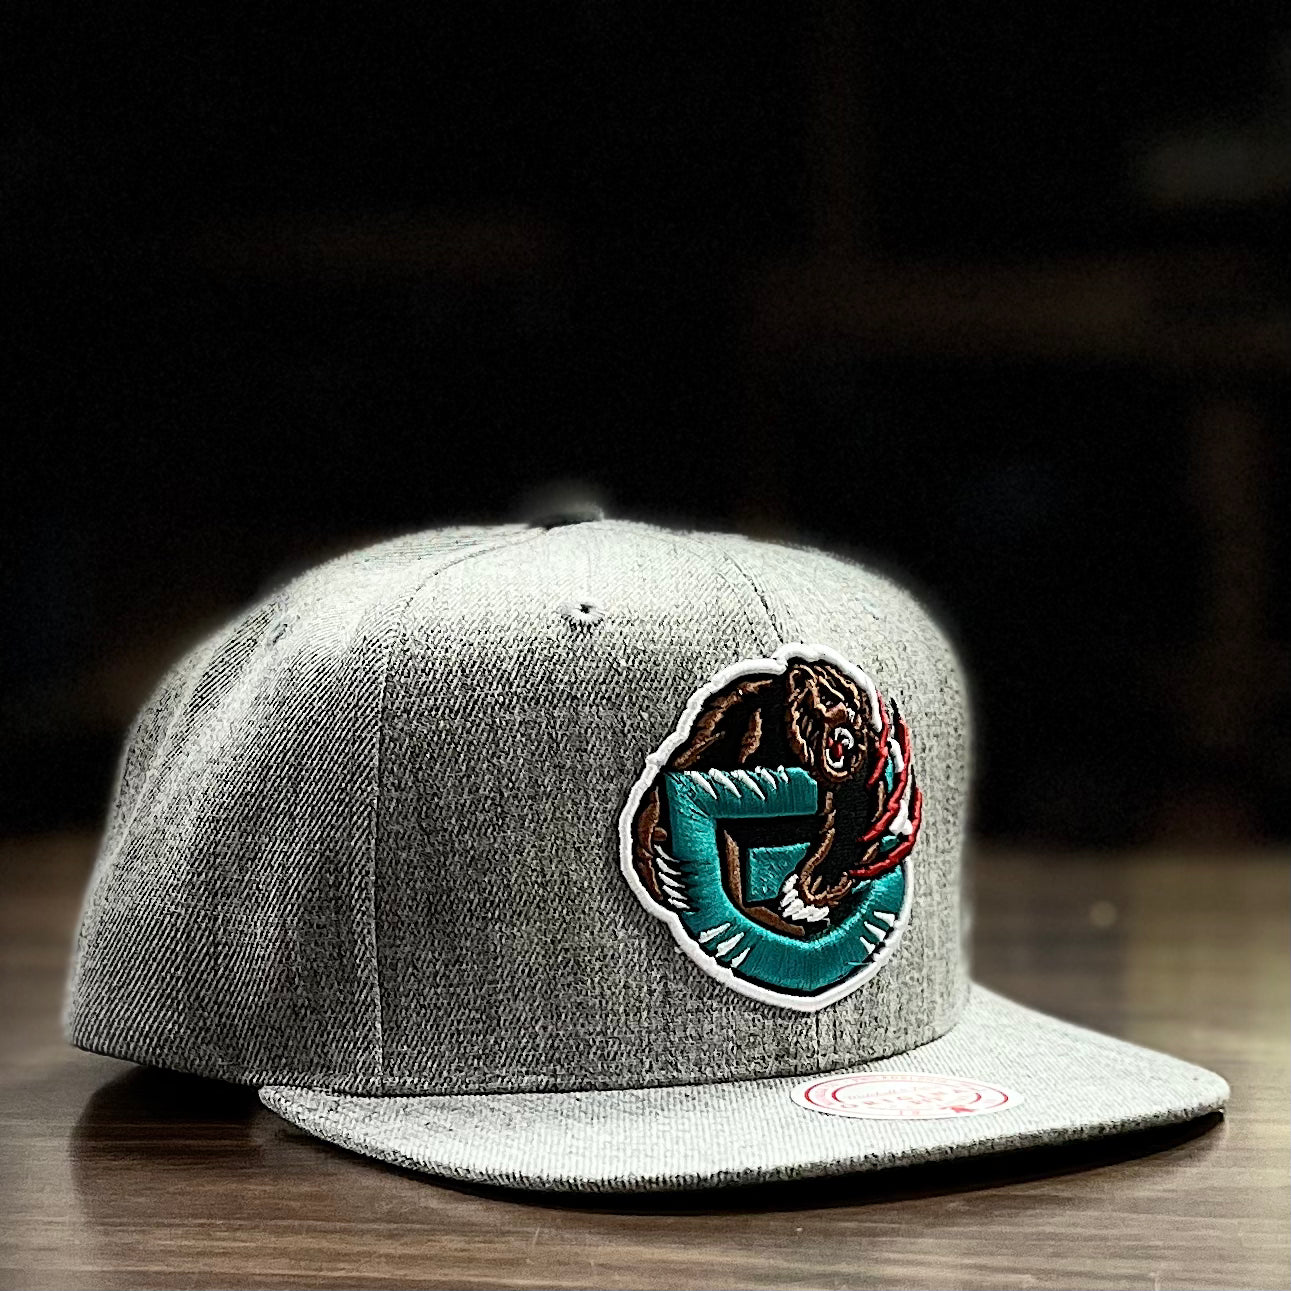 grizzlies snapback mitchell and ness